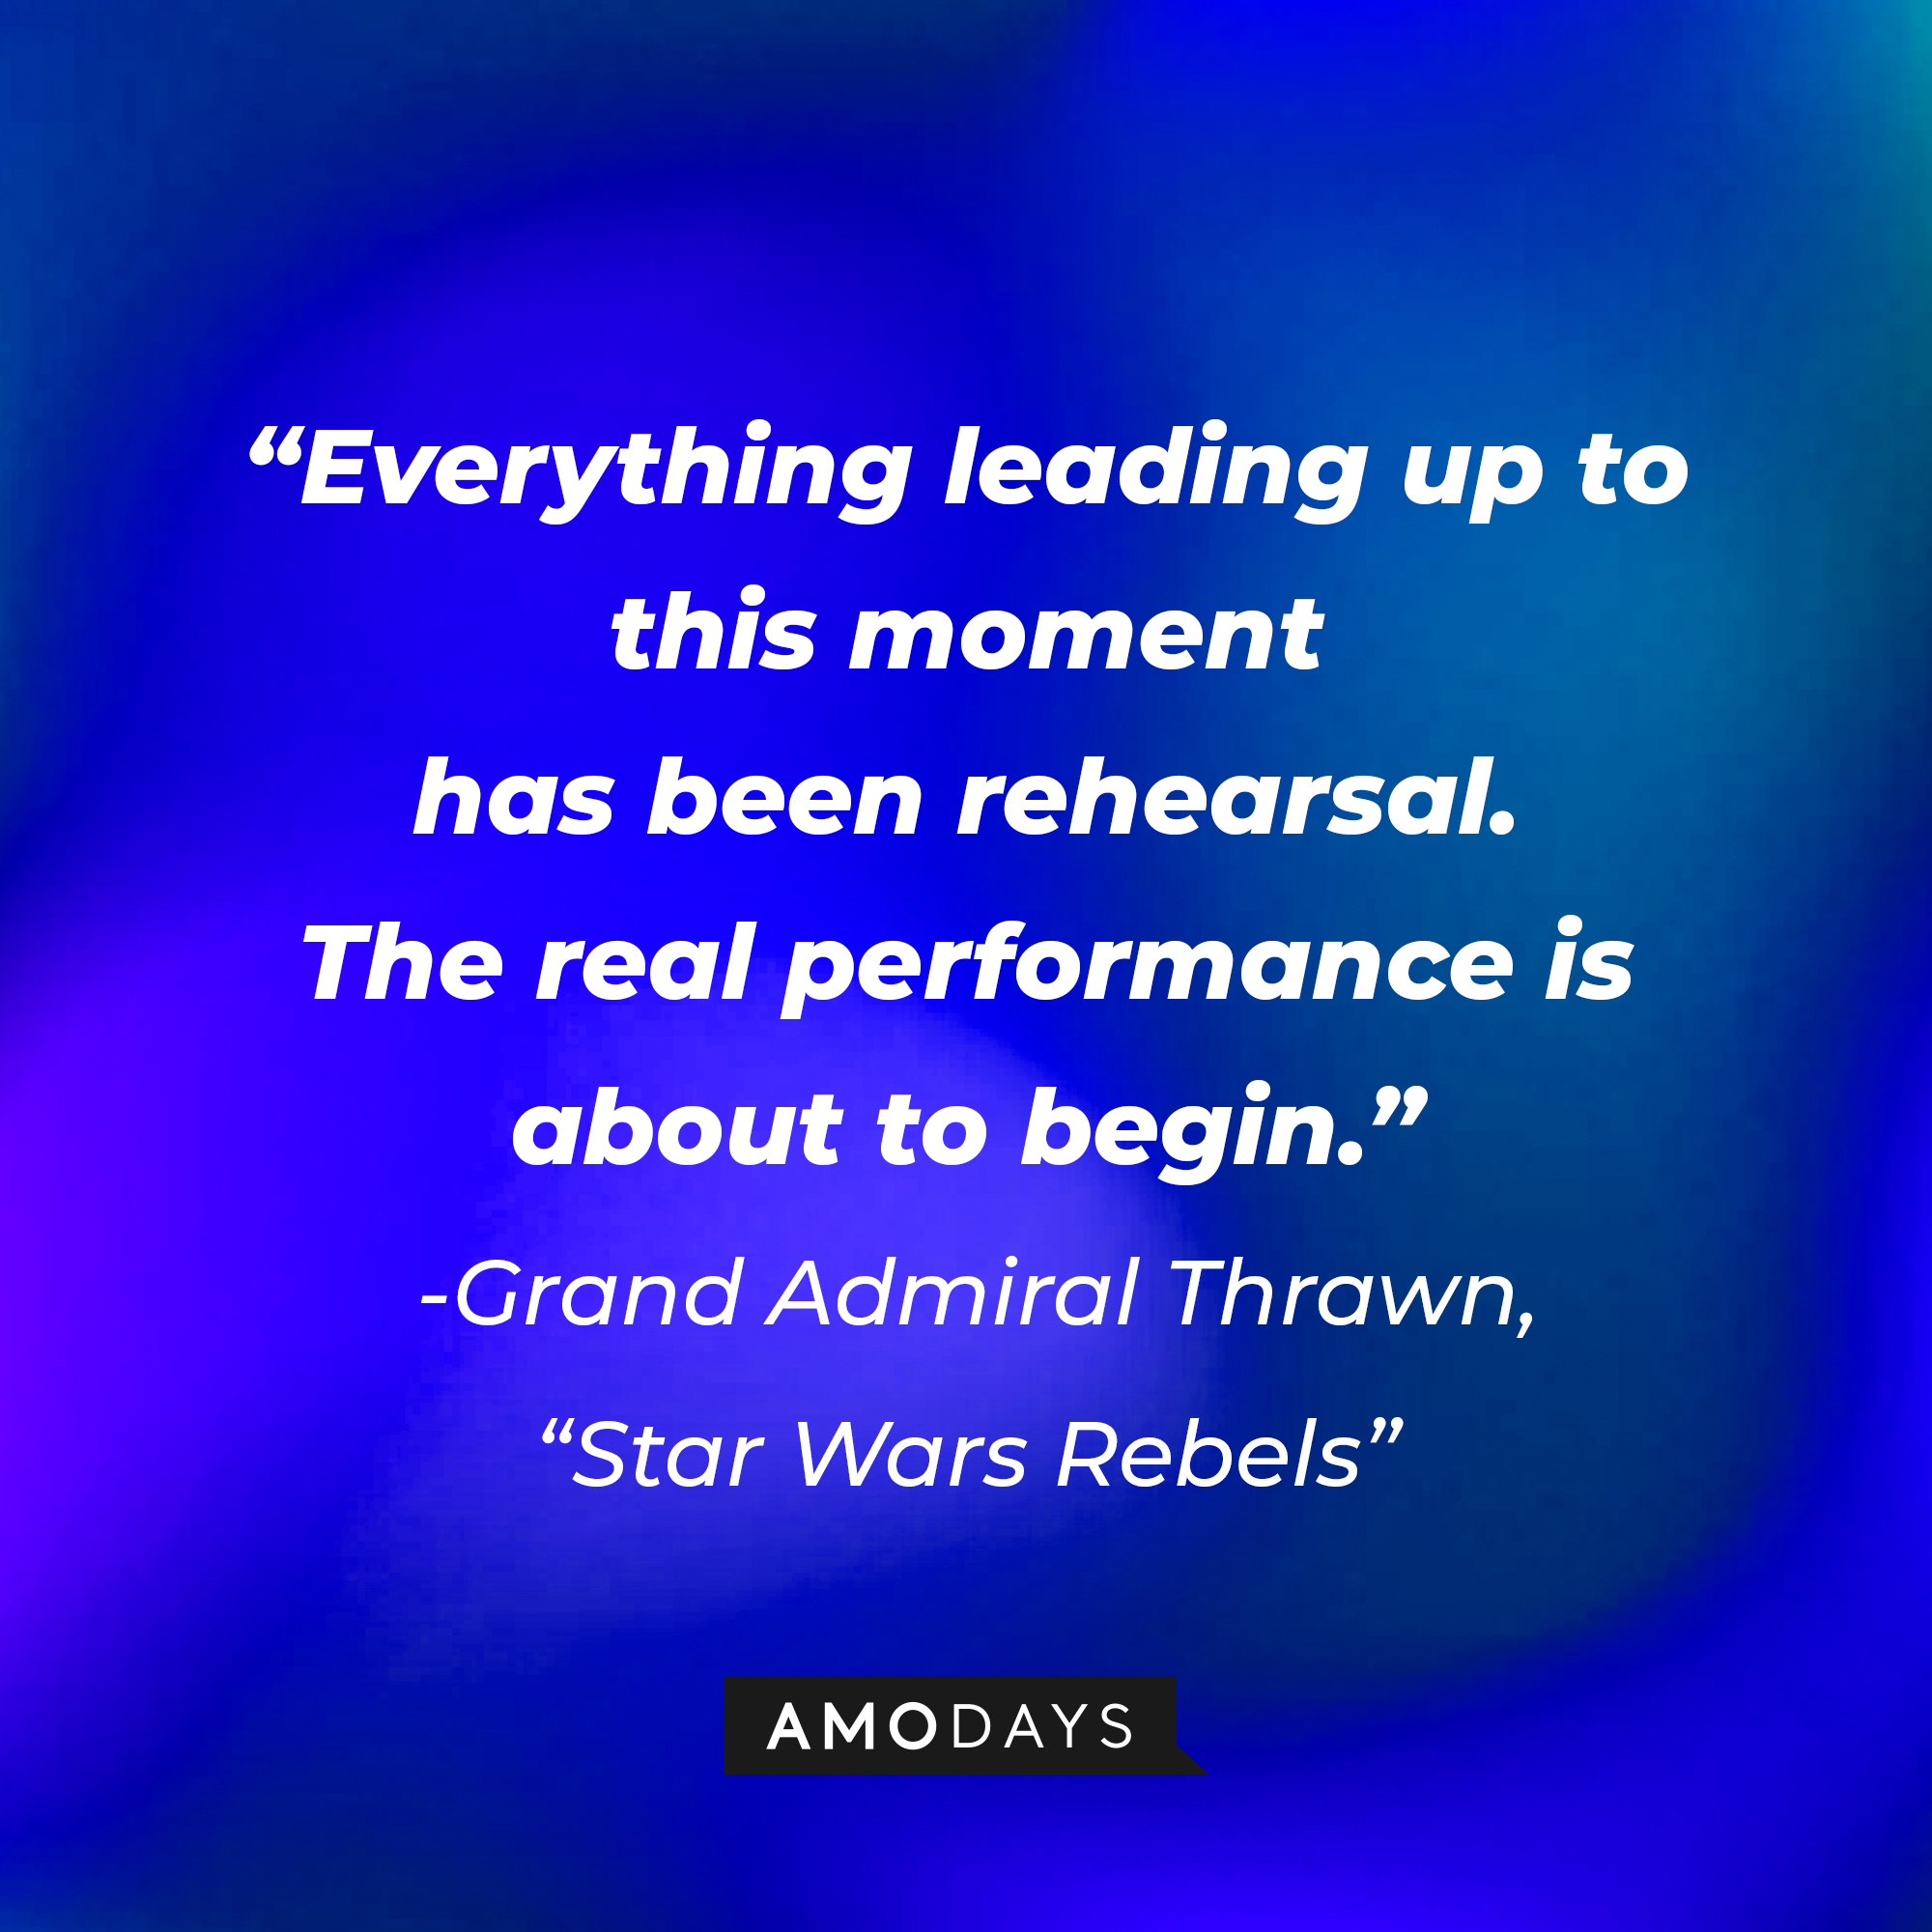 Grand Admiral Thrawn's quote: "Everything leading up to this moment has been rehearsal. The real performance is about to begin." | Source: AmoDays